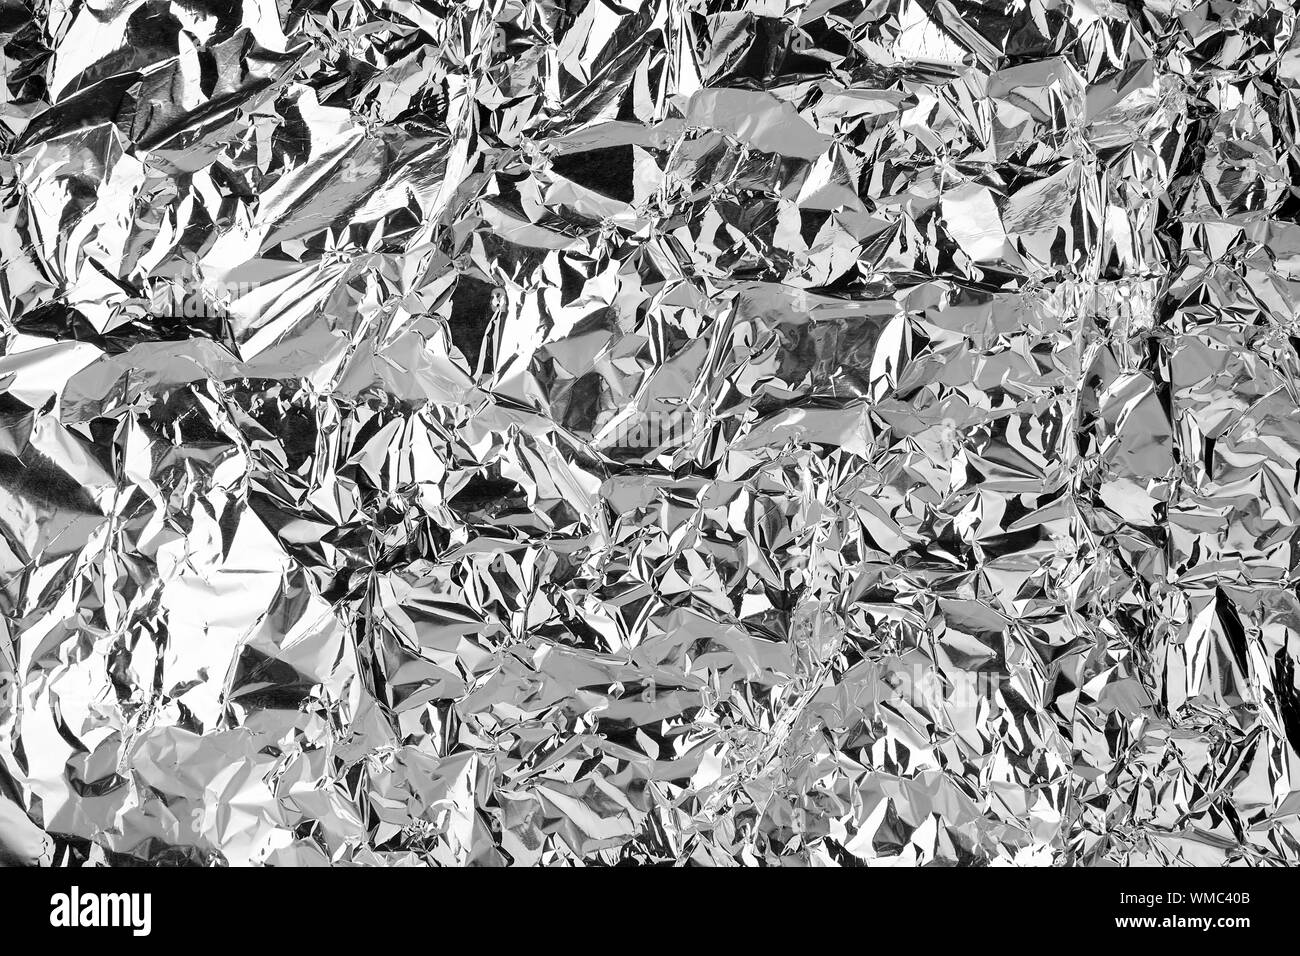 Crumpled silver foil shining texture background, bright shiny festive  design, metallic glitter surface, holiday decoration backdrop concept,  metal Stock Photo - Alamy